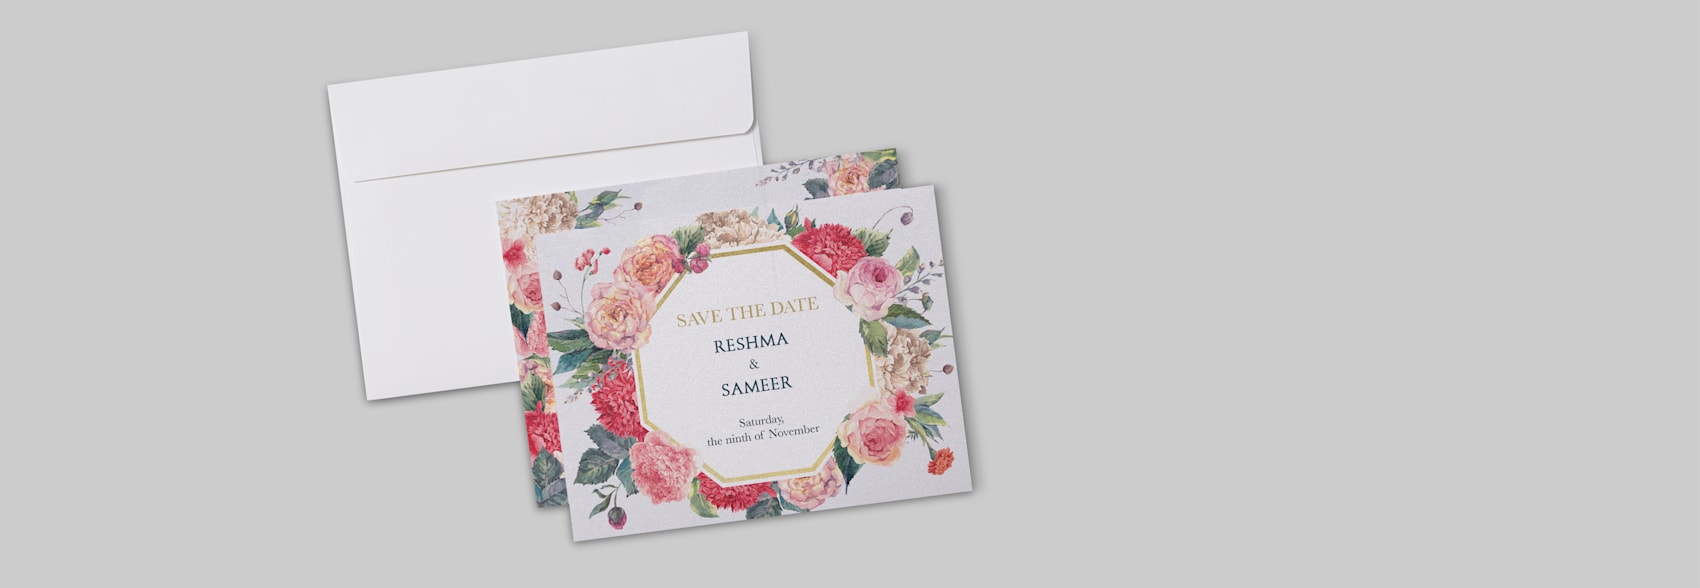 Larger version: Save the Date Cards